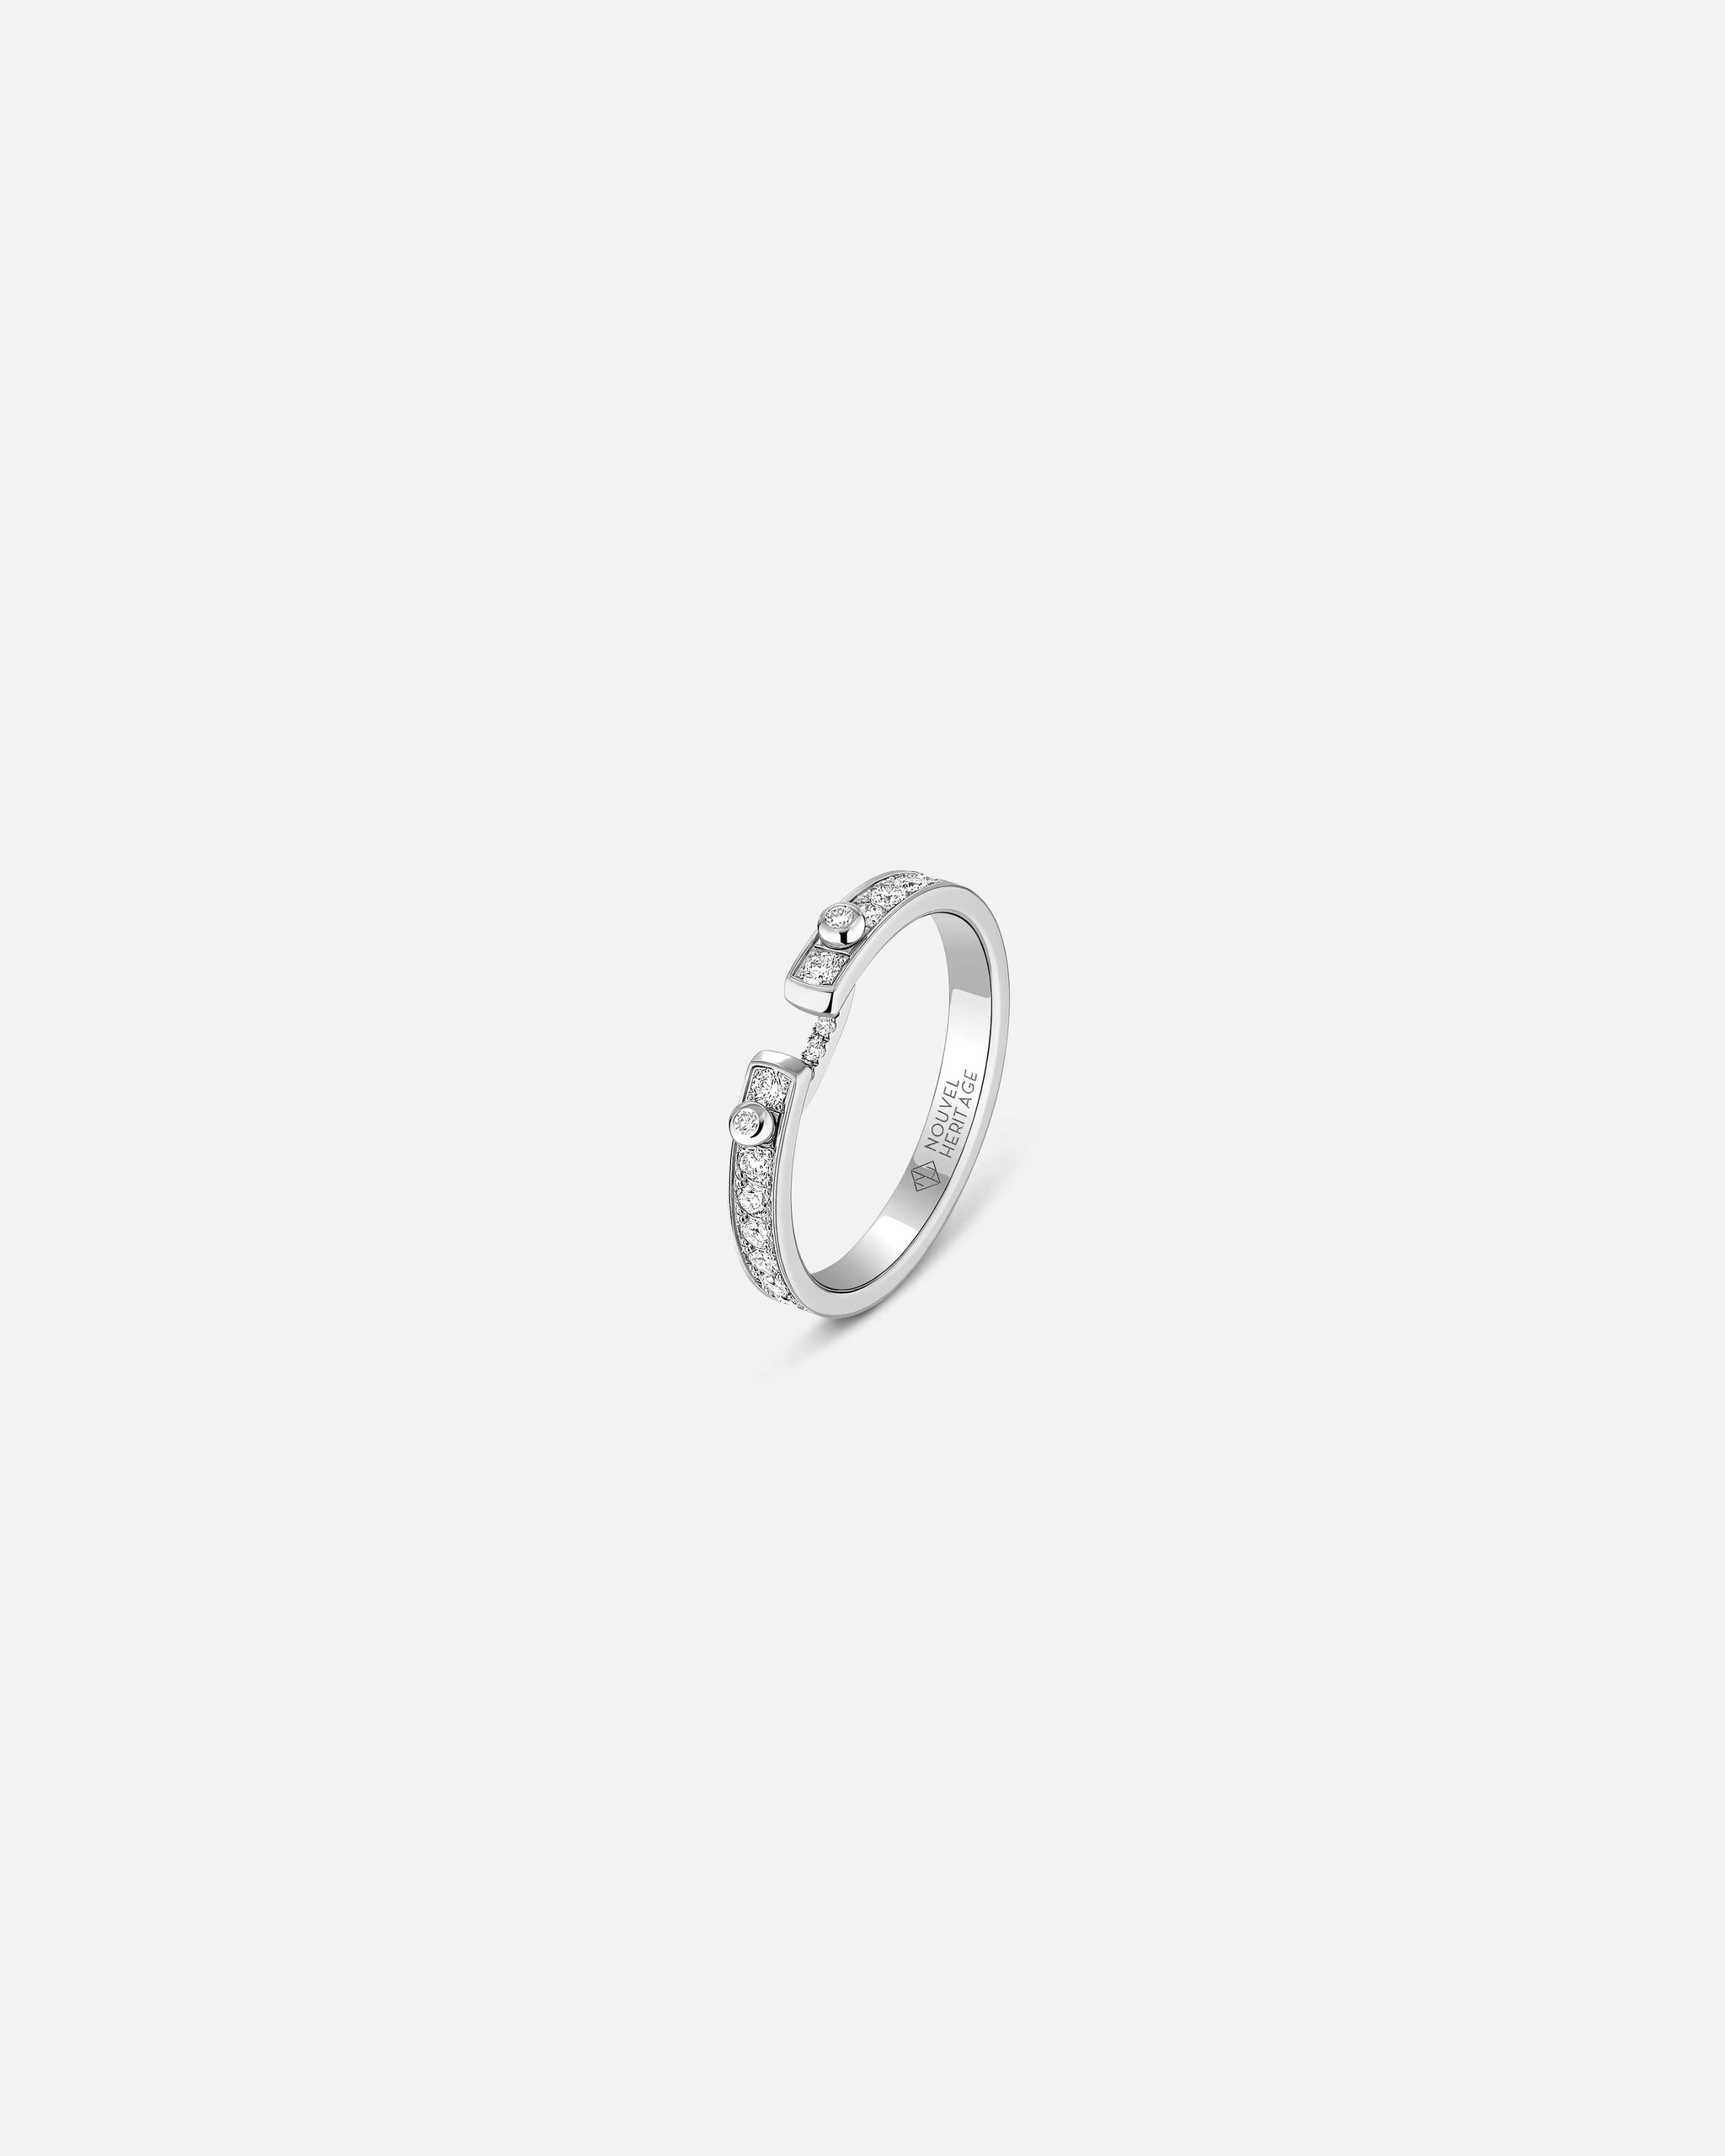 Eternity Tuxedo PM Mood Ring in White Gold - 1 - Nouvel Heritage